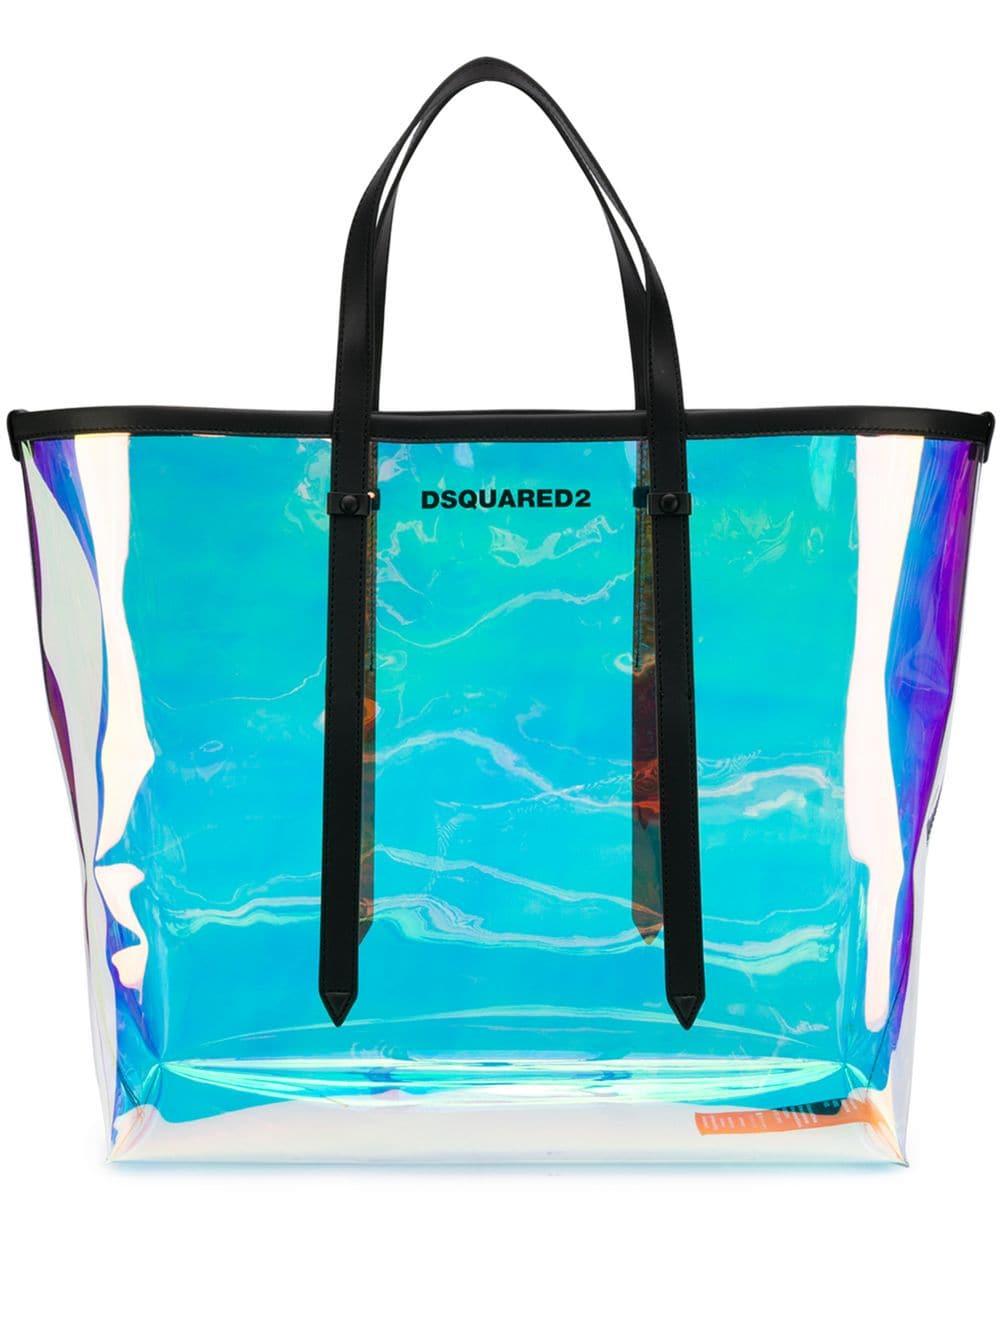 Businessman Supposed to Defile dsquared2 tote bag Mariner Give rights wool